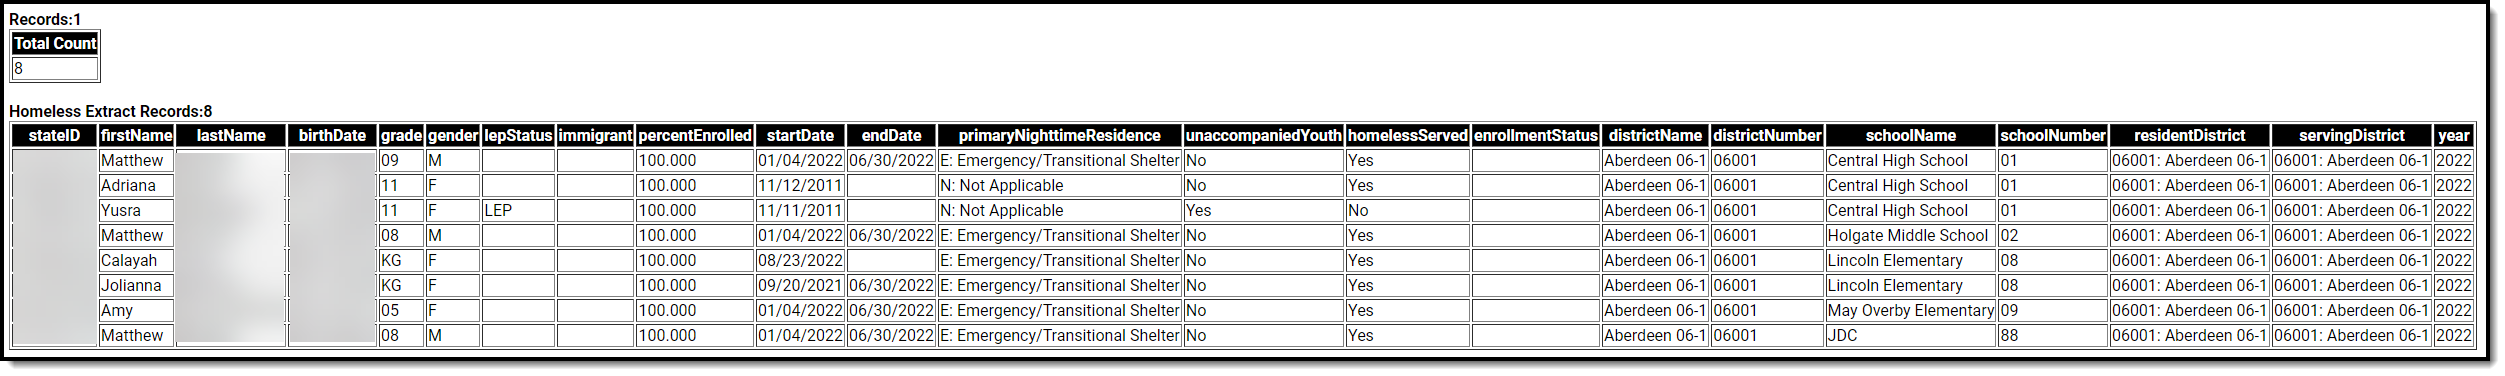 Screenshot of the Homeless Extract in HTML Format.